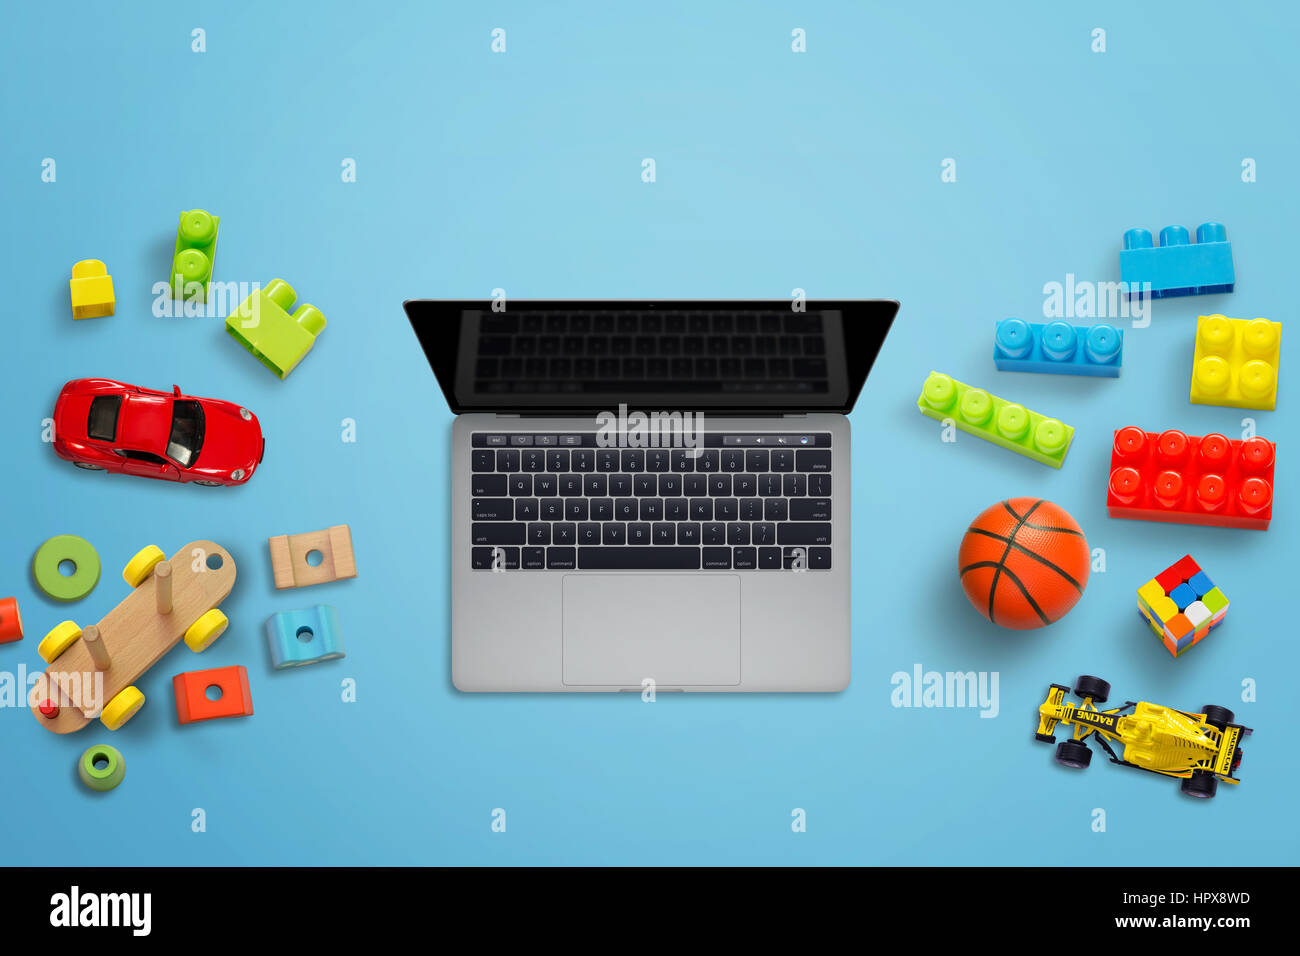 Laptop computer and kid toys on blue desk. Top view. Blank display for app, game mockup presentation. Stock Photo